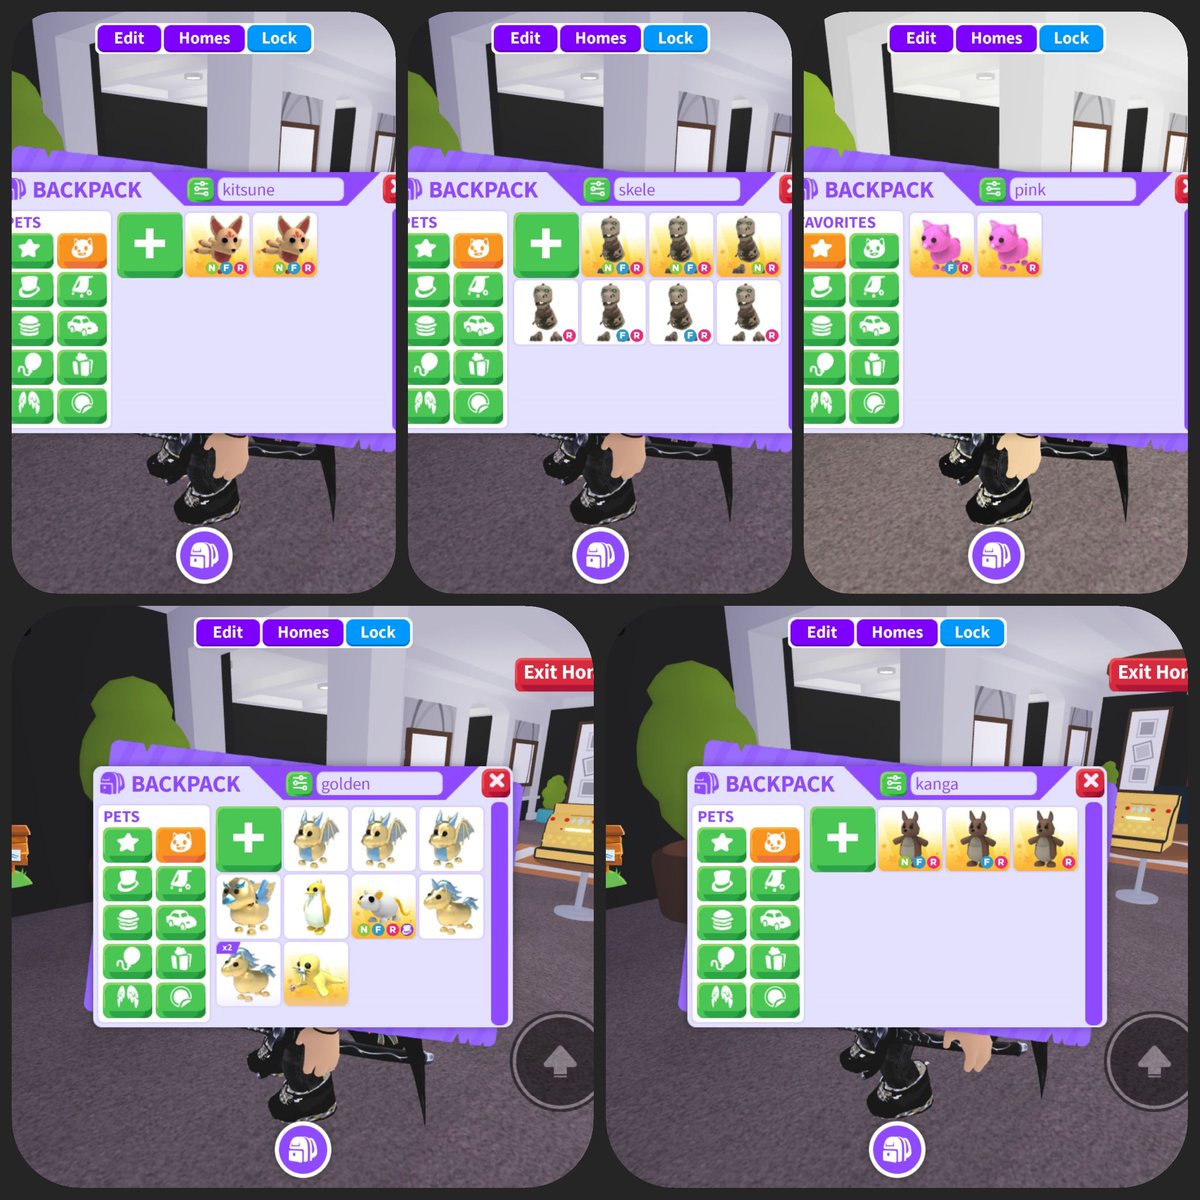 I have more pets for sale for robux only. NGF, since I got scammed for 19pets=dumb me, but I hope yall are interested! #adoptmecrosstrading #adoptmeoffer #adoptmecrosstrade #adoptmetrades #robux #royalehigh #royalehighcrosstrade #royalehightrading #royalehightrades #robuxtrade